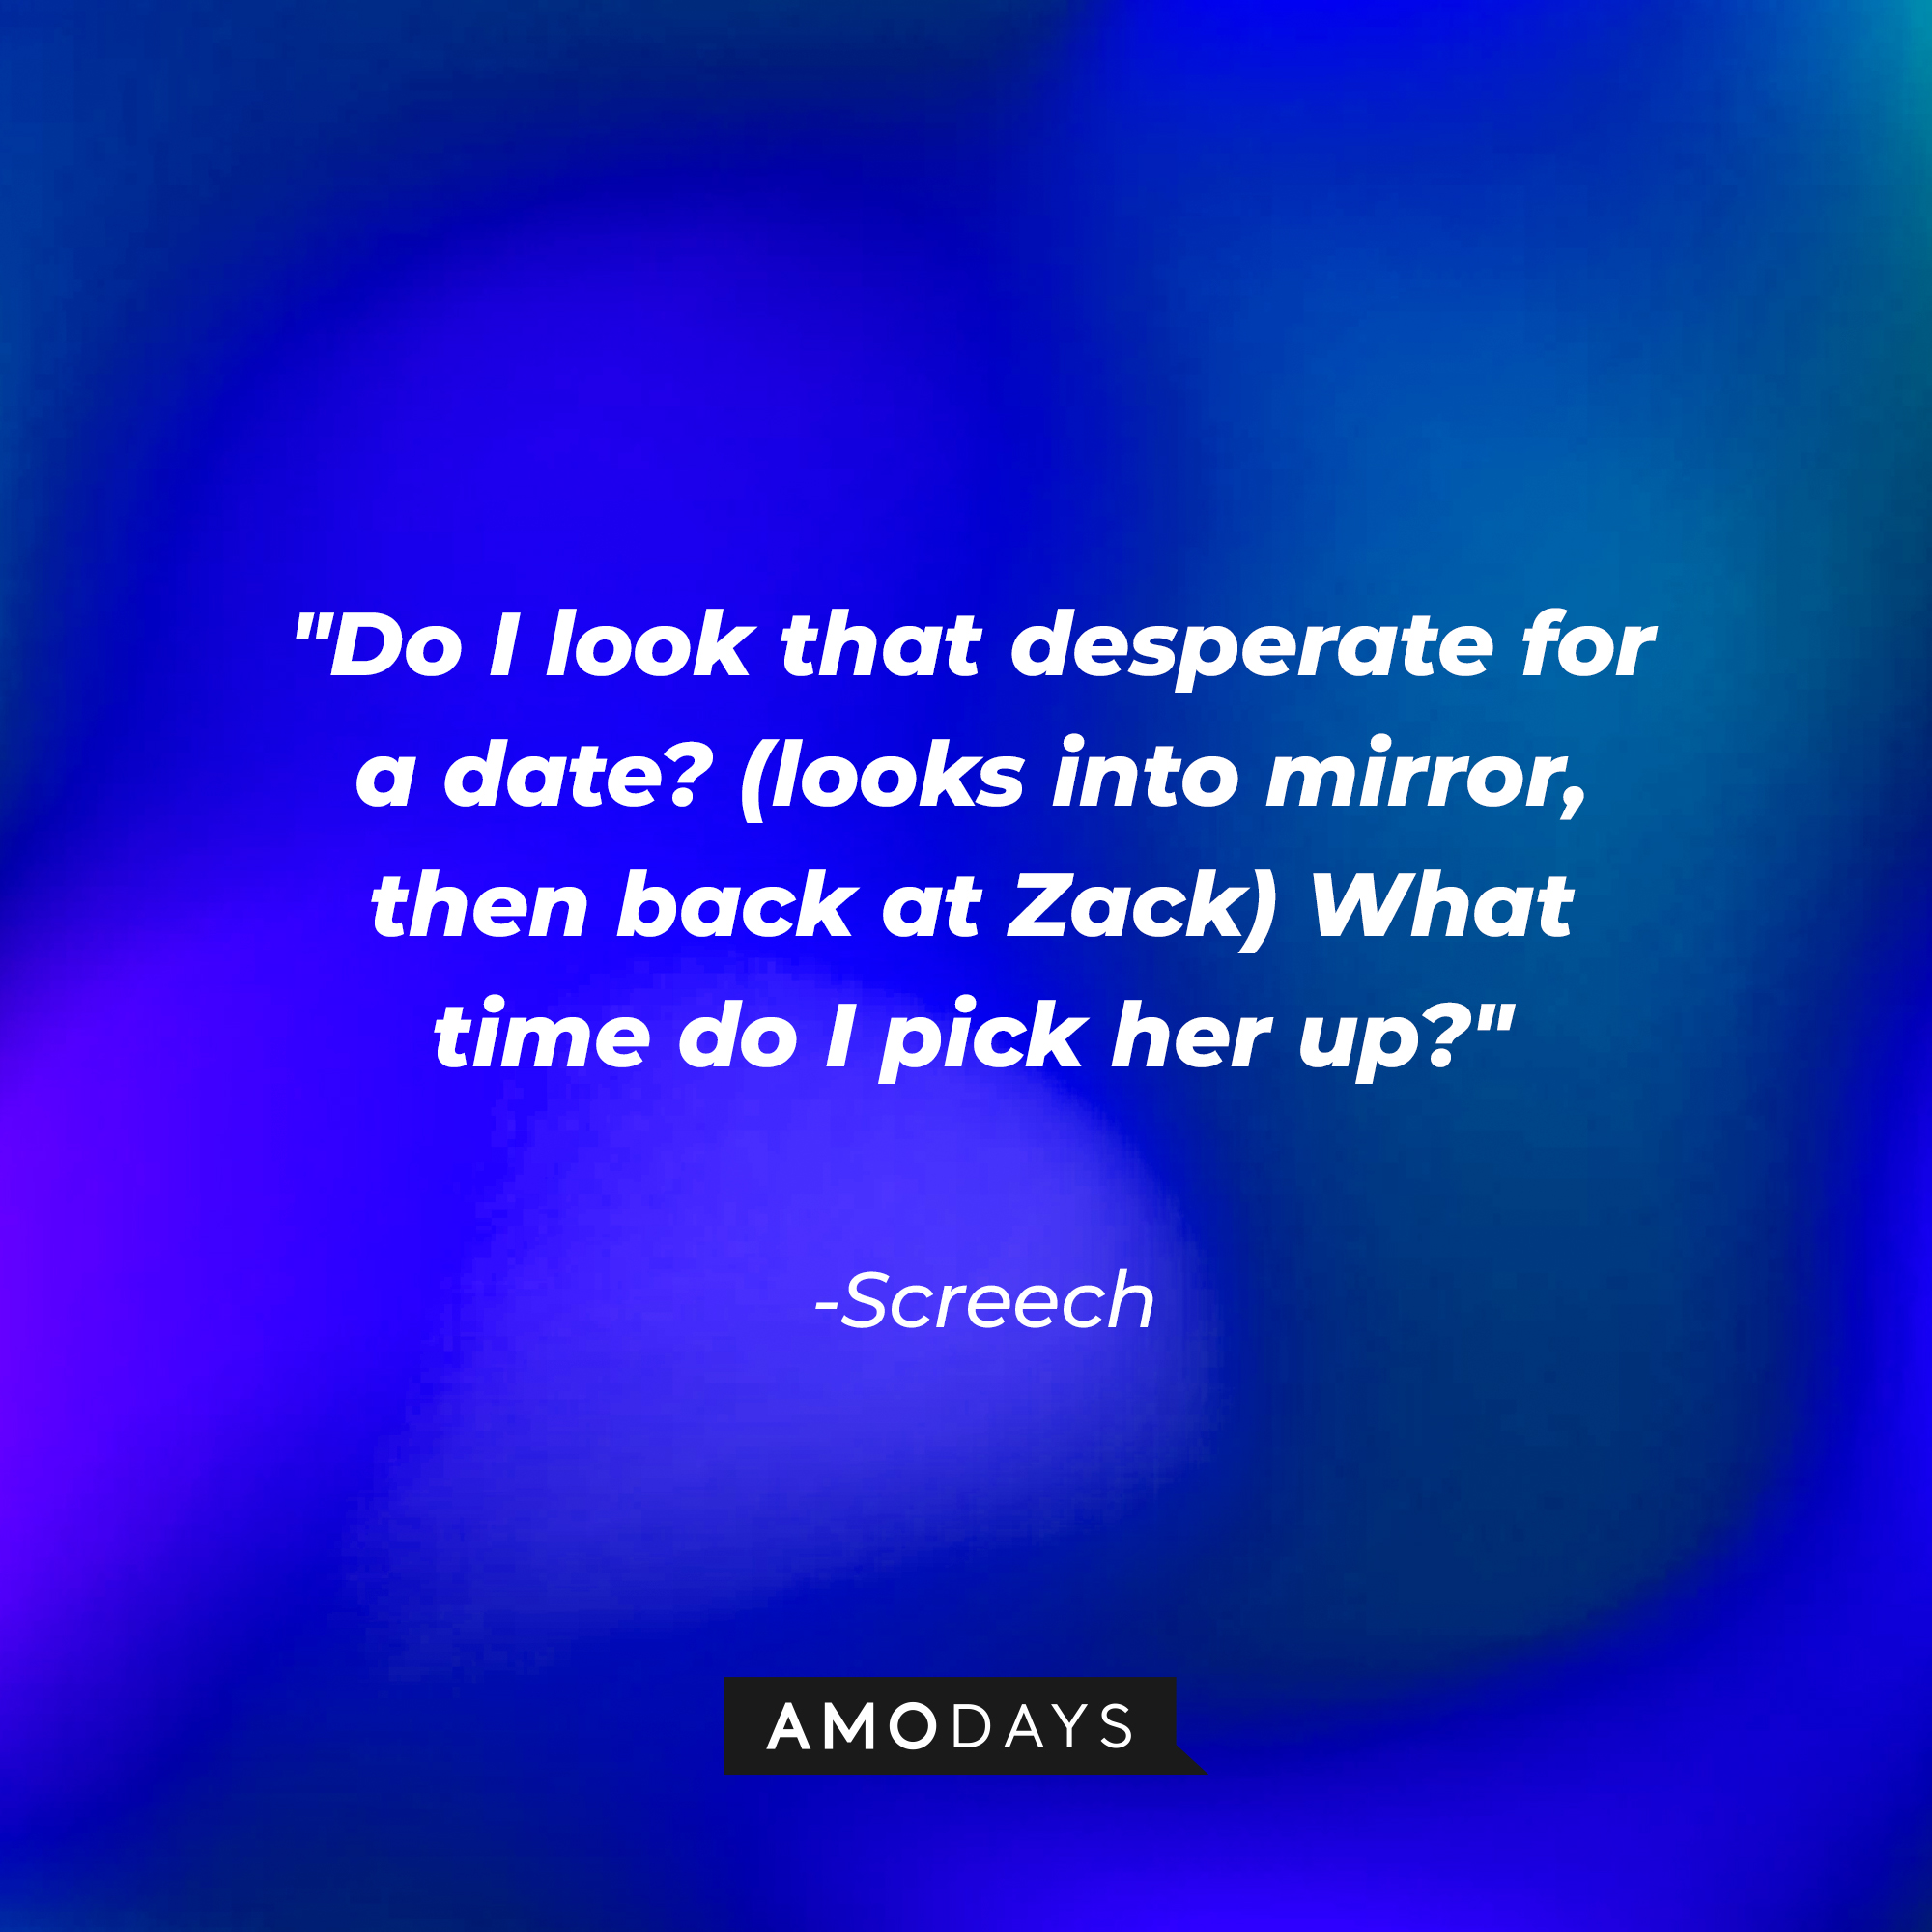 Screech with his quote,  "Do I look that desperate for a date? (looks into mirror, then back at Zack) What time do I pick her up?" | Source: youtube.com/SavedbytheBell